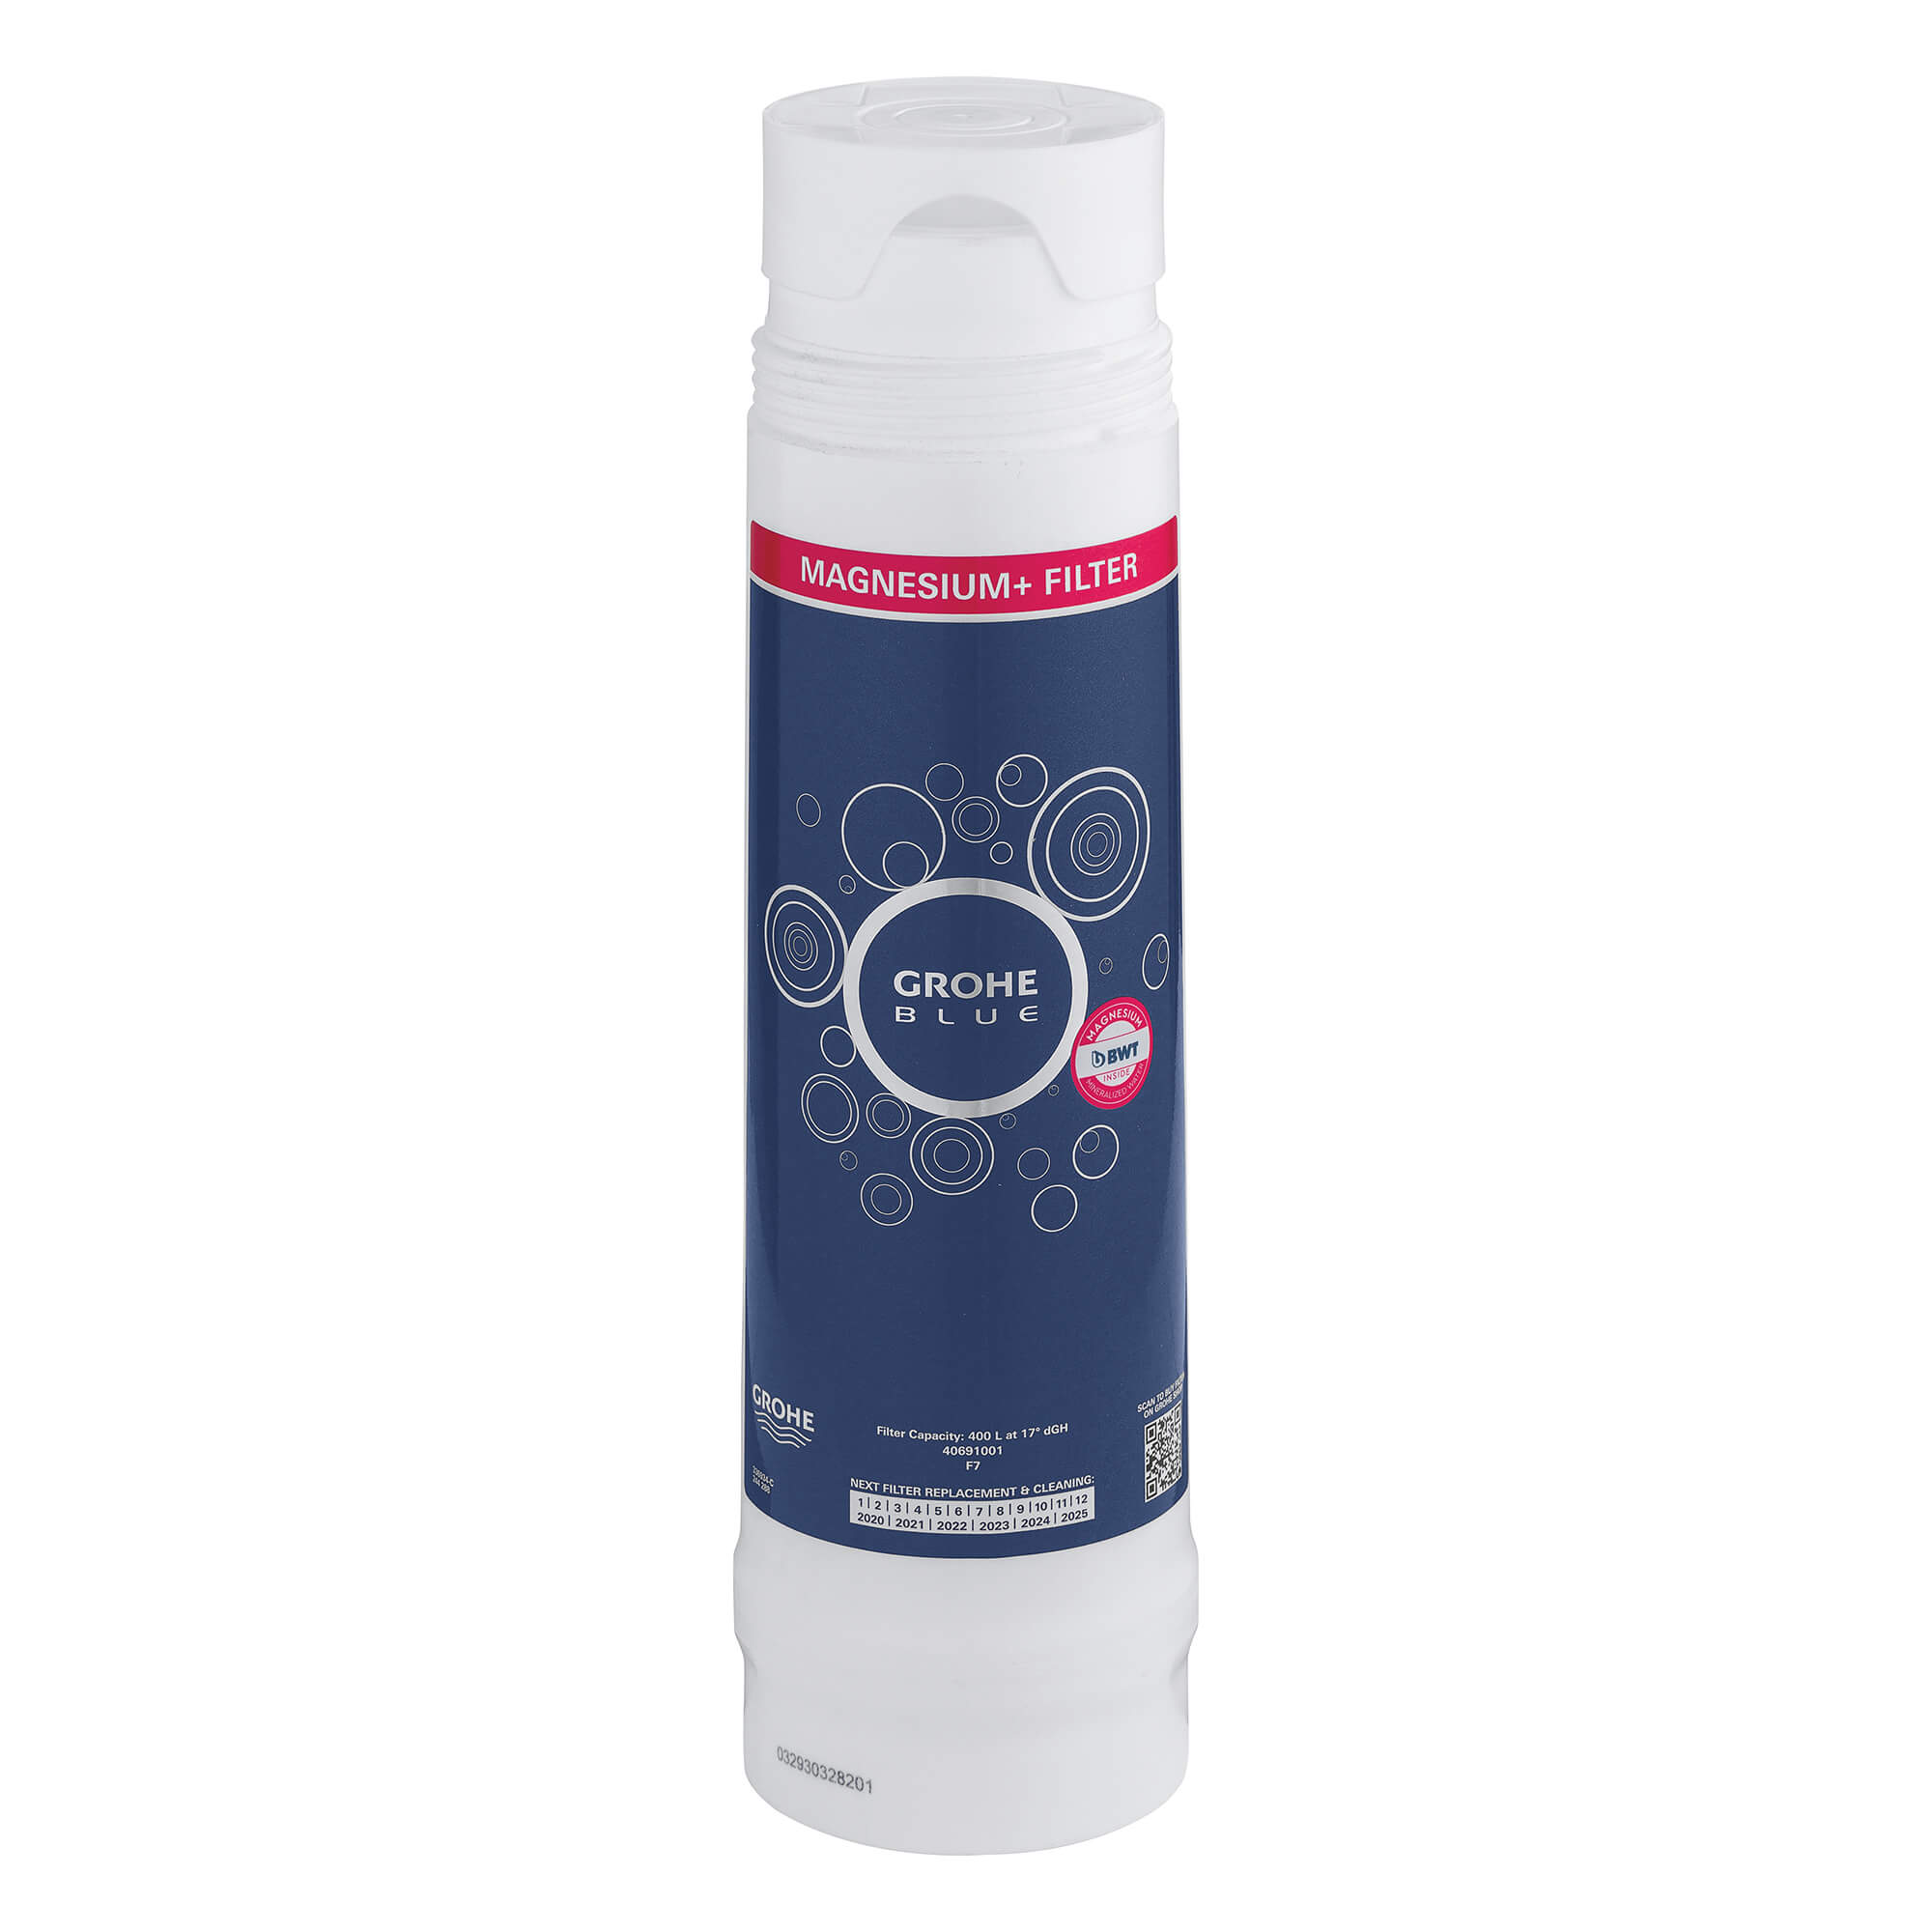 GROHE Blue® Magnesium Filter